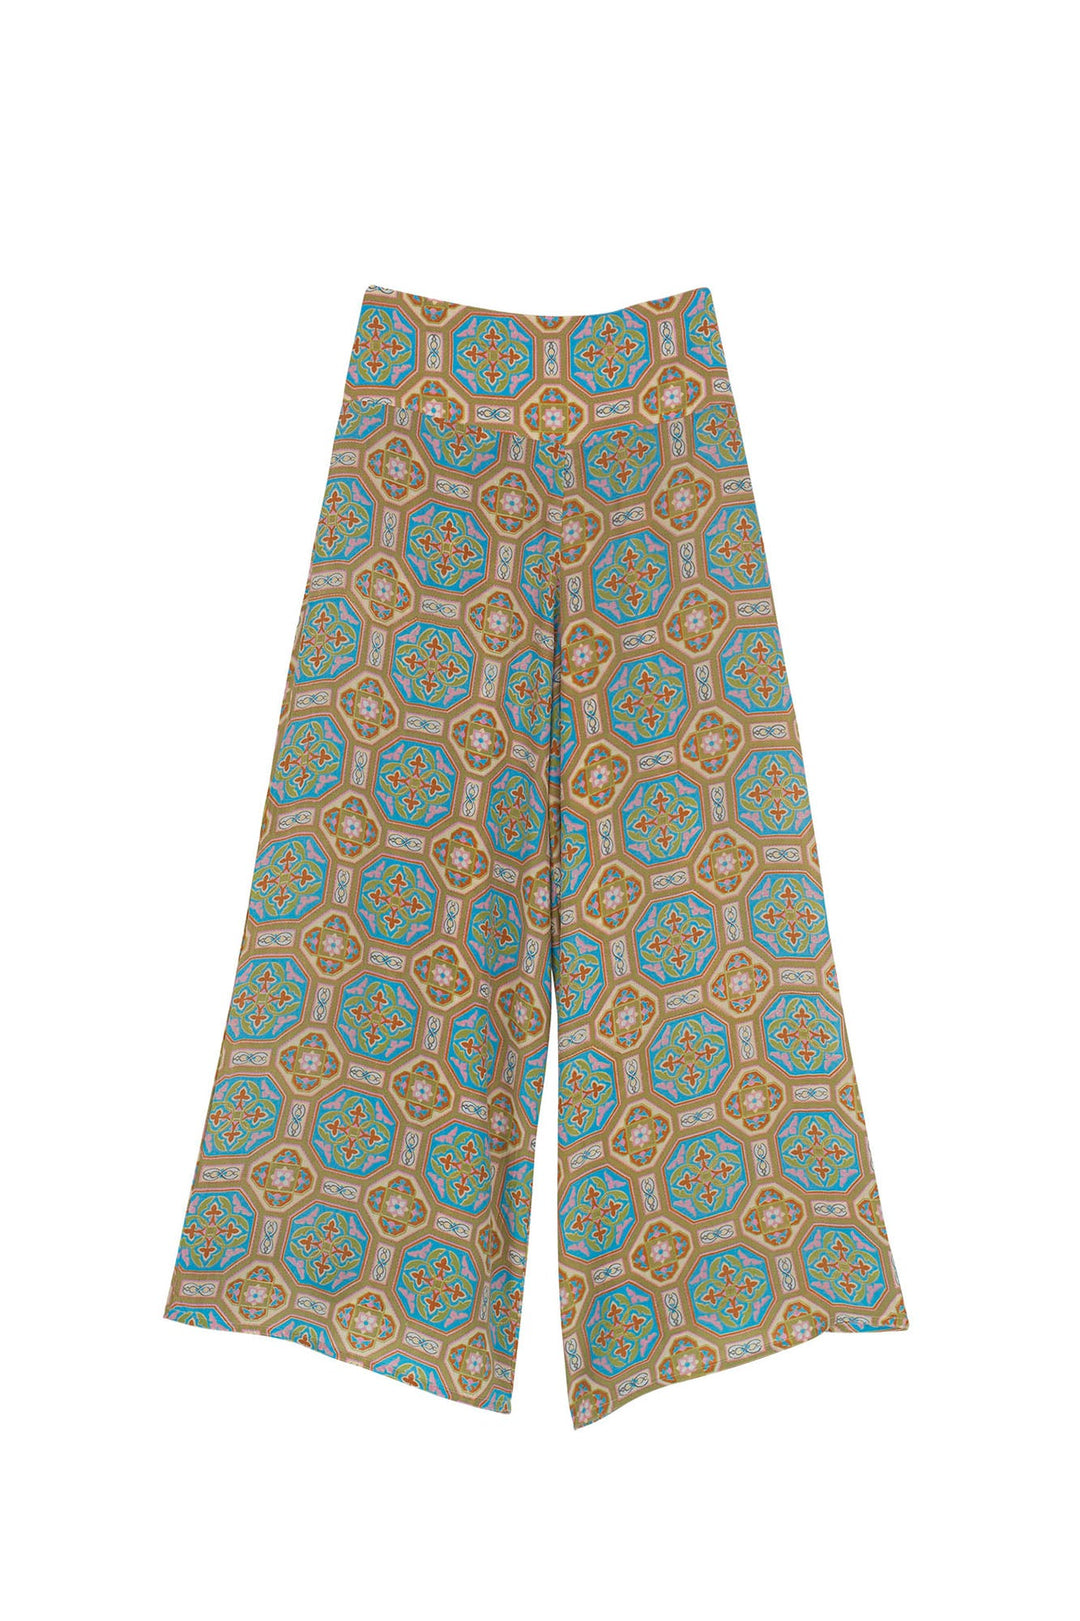 Women's palazzo trouser pants in vintage tiles blue print by One Hundred Stars